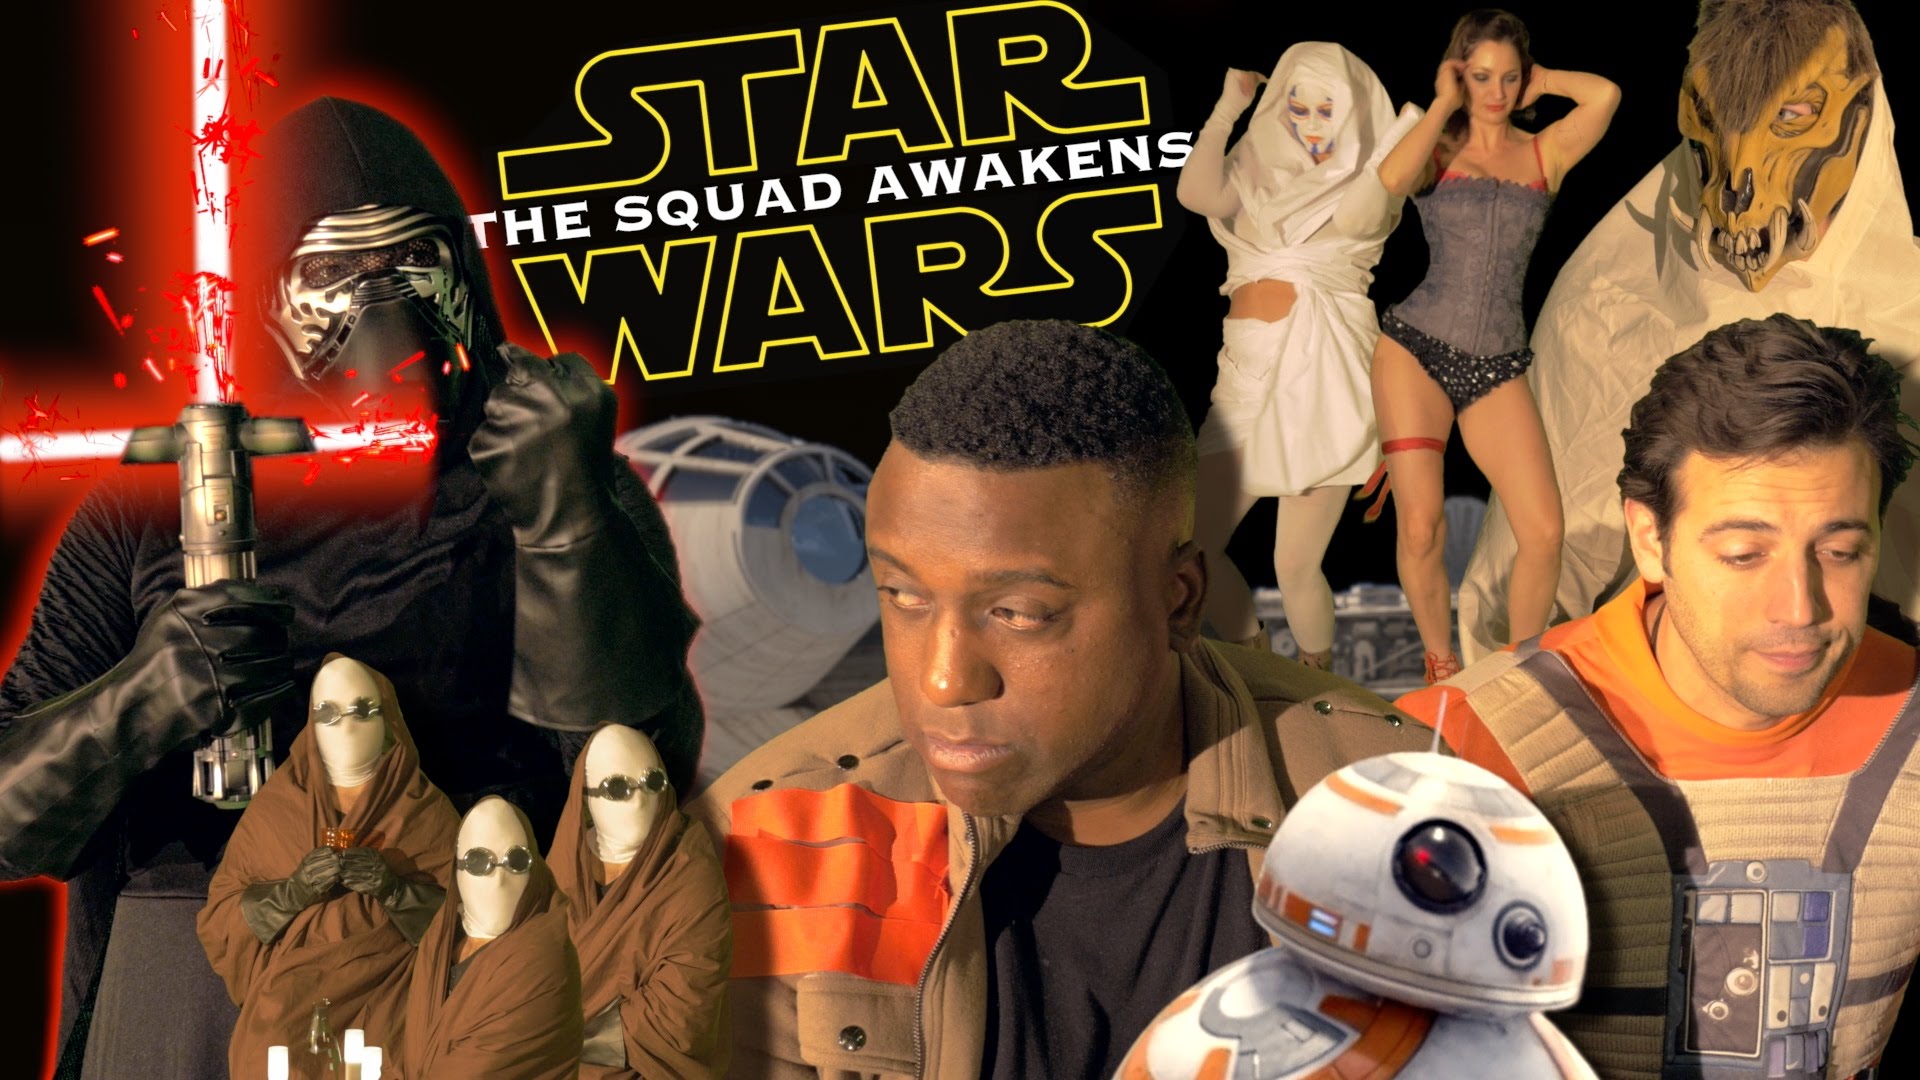 Star Wars: The Squad Awakens - What if it was Gangster? (Video)